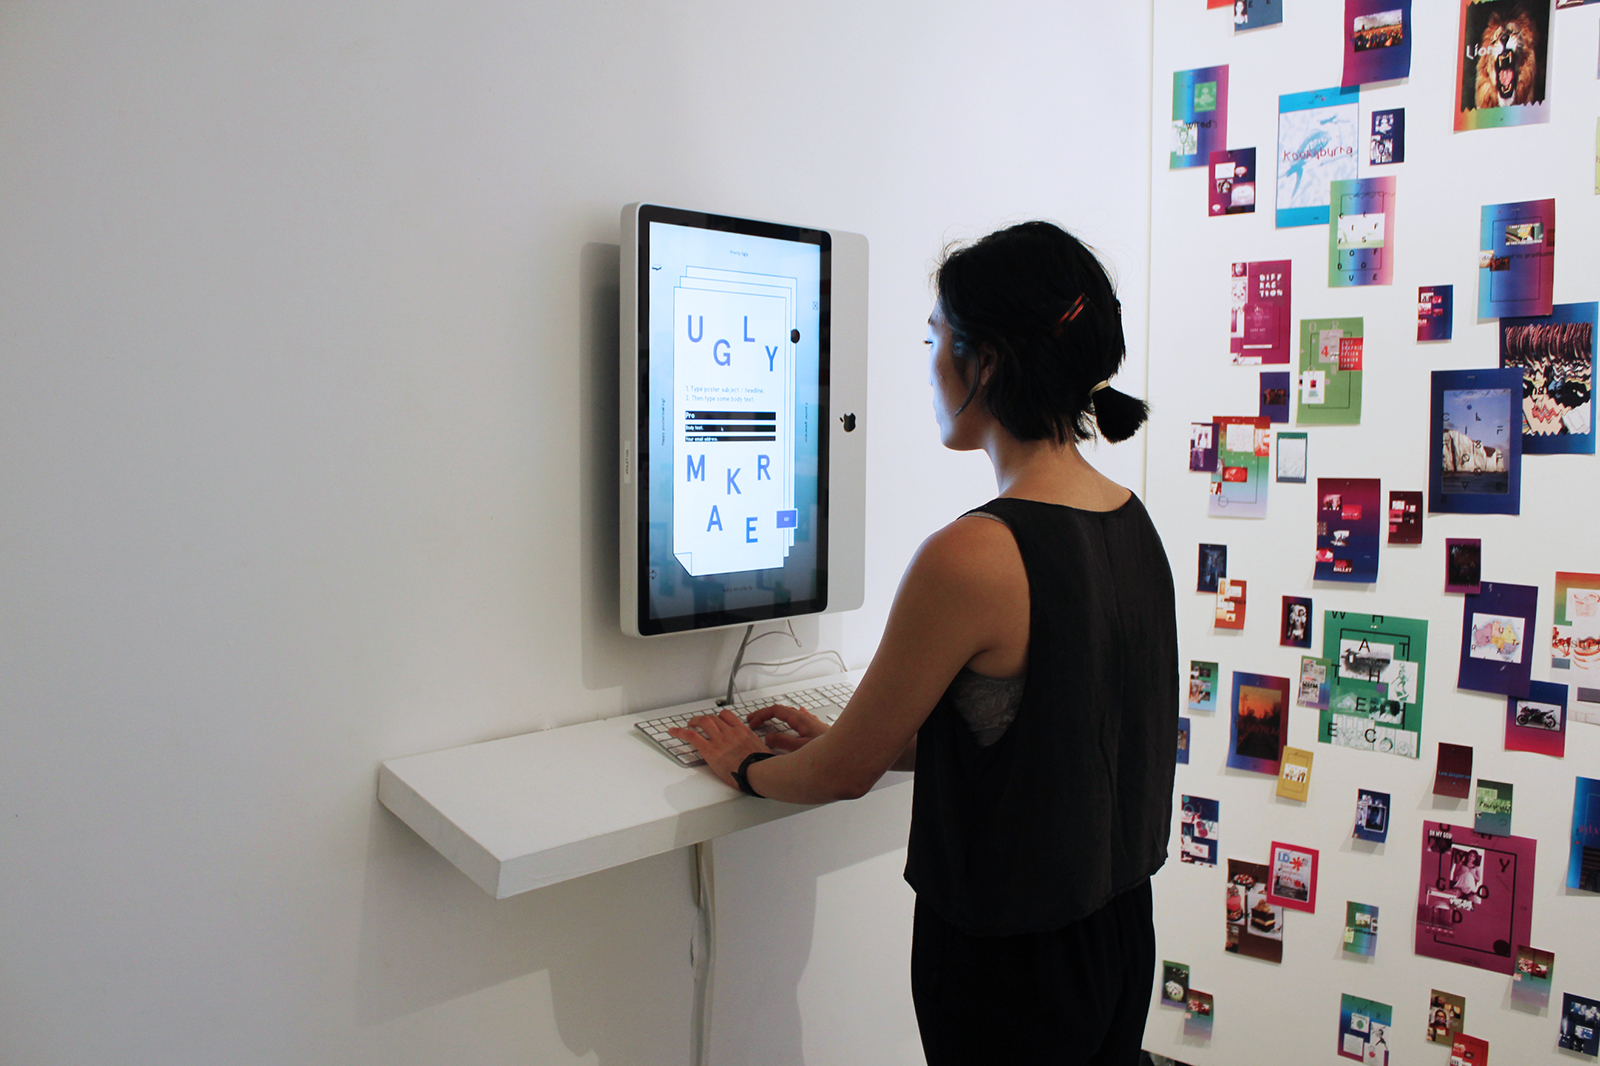 A young Asian woman inputs text in the main interface of Uglymaker. To her right is a wall of overlapping tiny colorful posters generated by the Uglymaker.